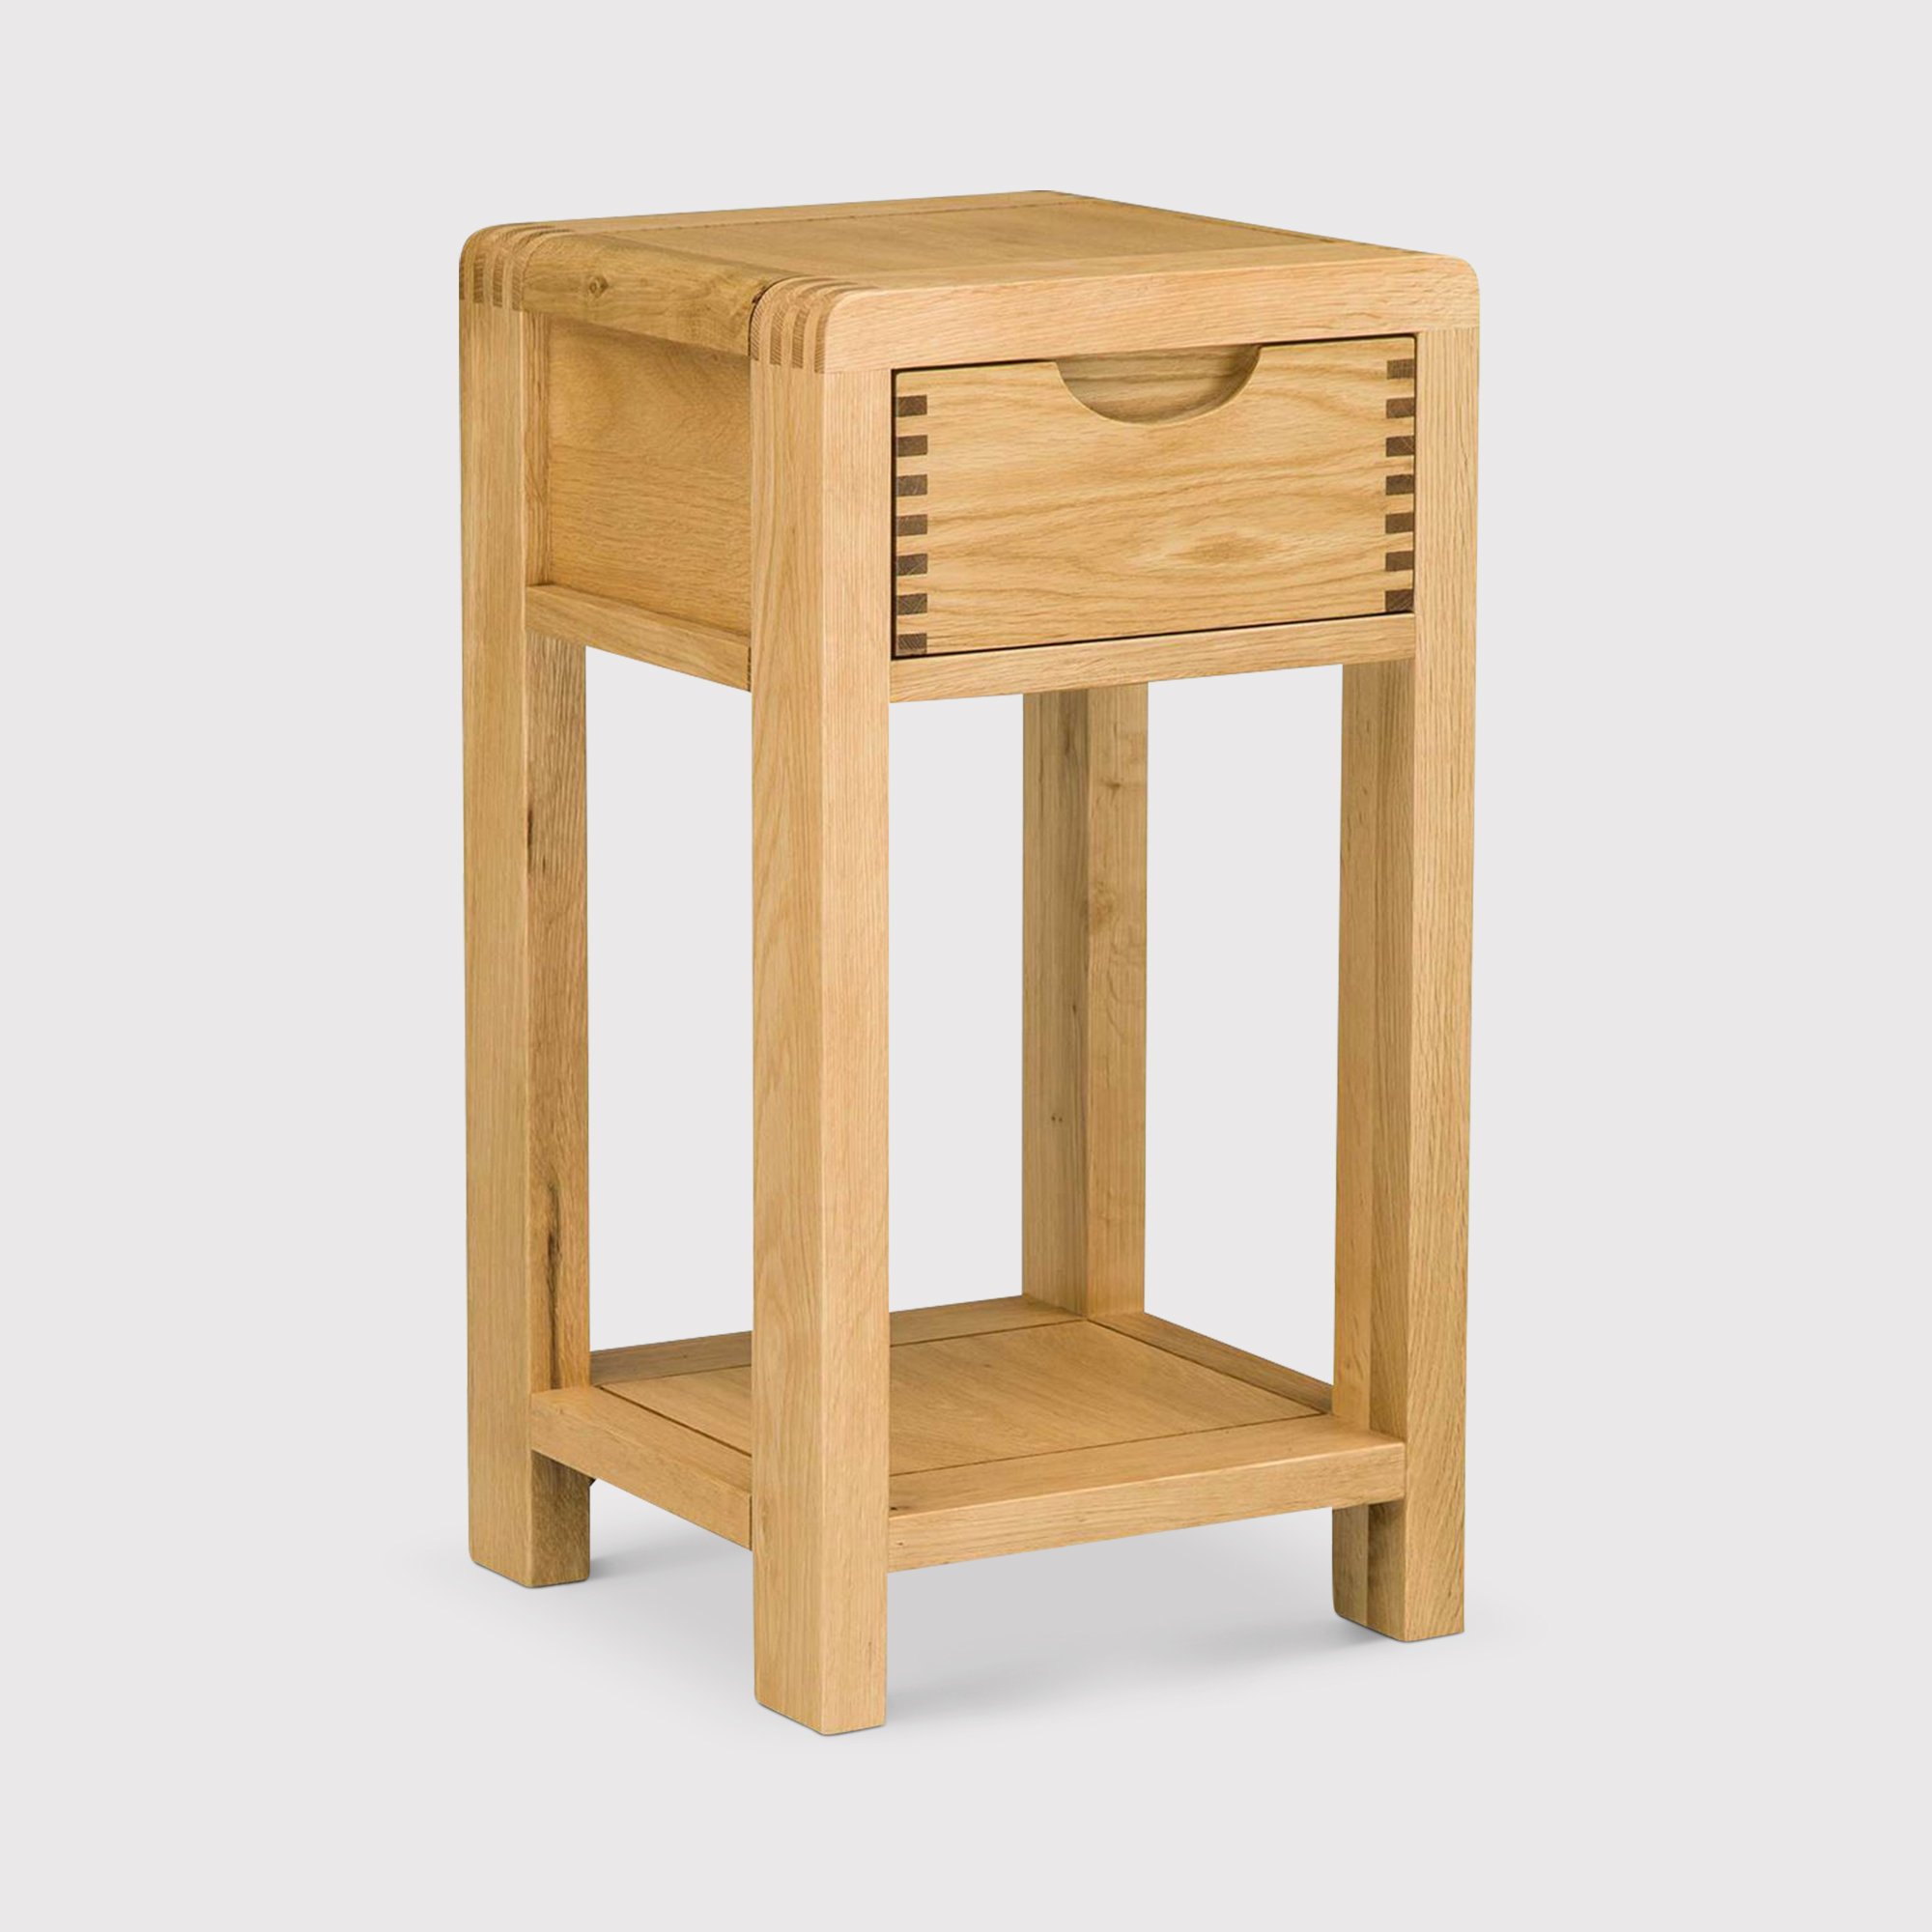 Ercol Bosco Compact Side Table, Brown | Barker & Stonehouse